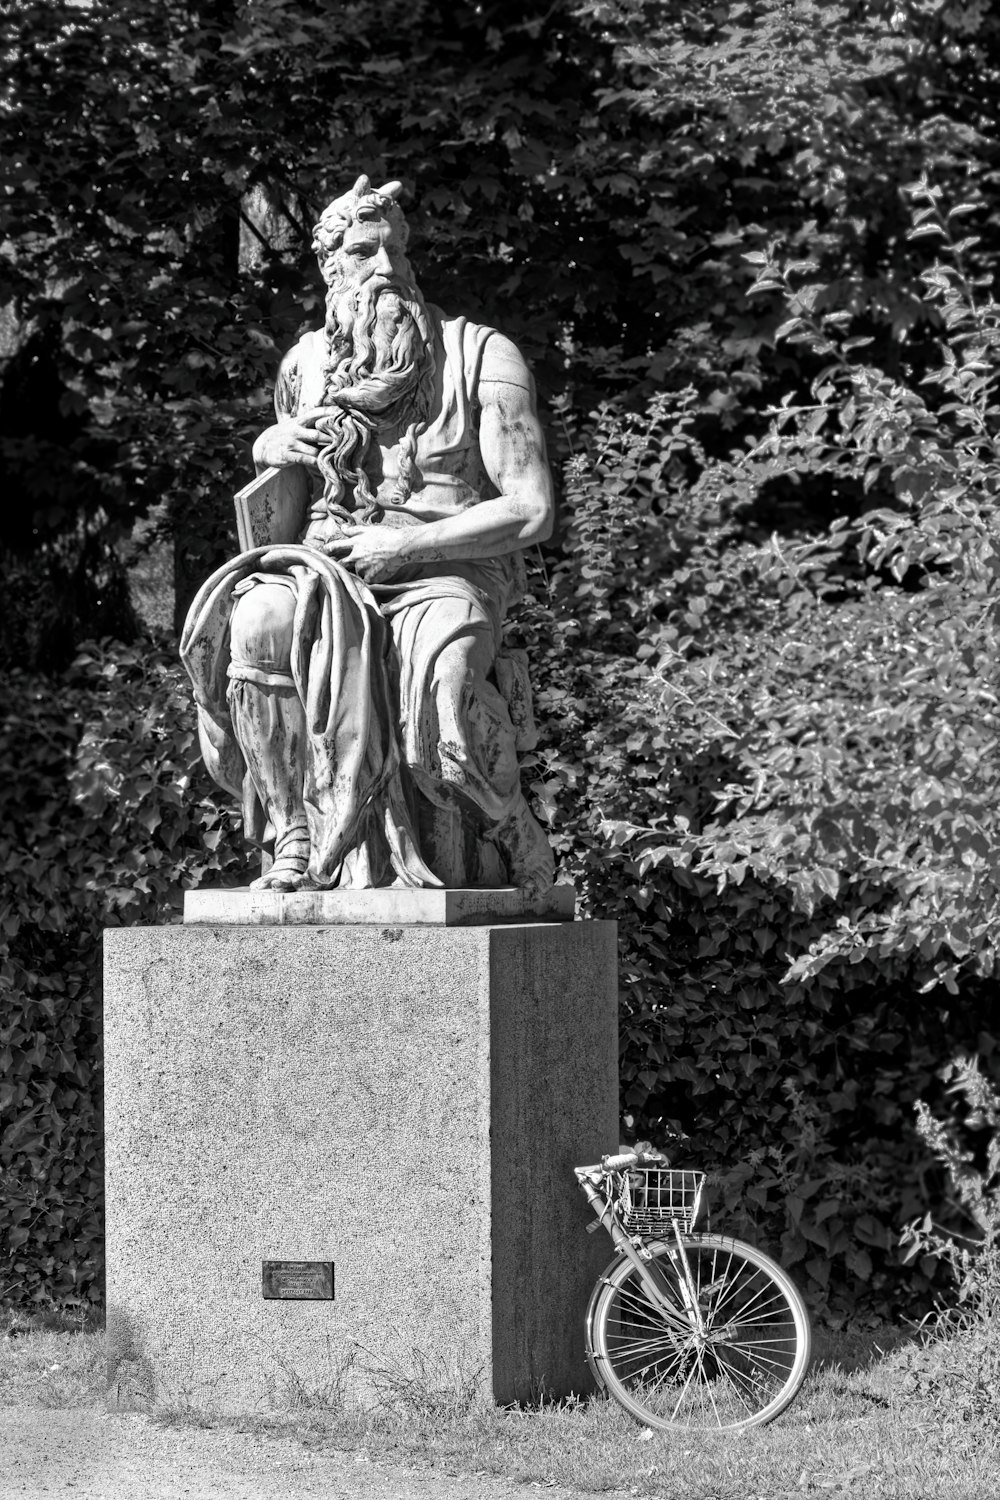 a statue of a person sitting on a stone pedestal